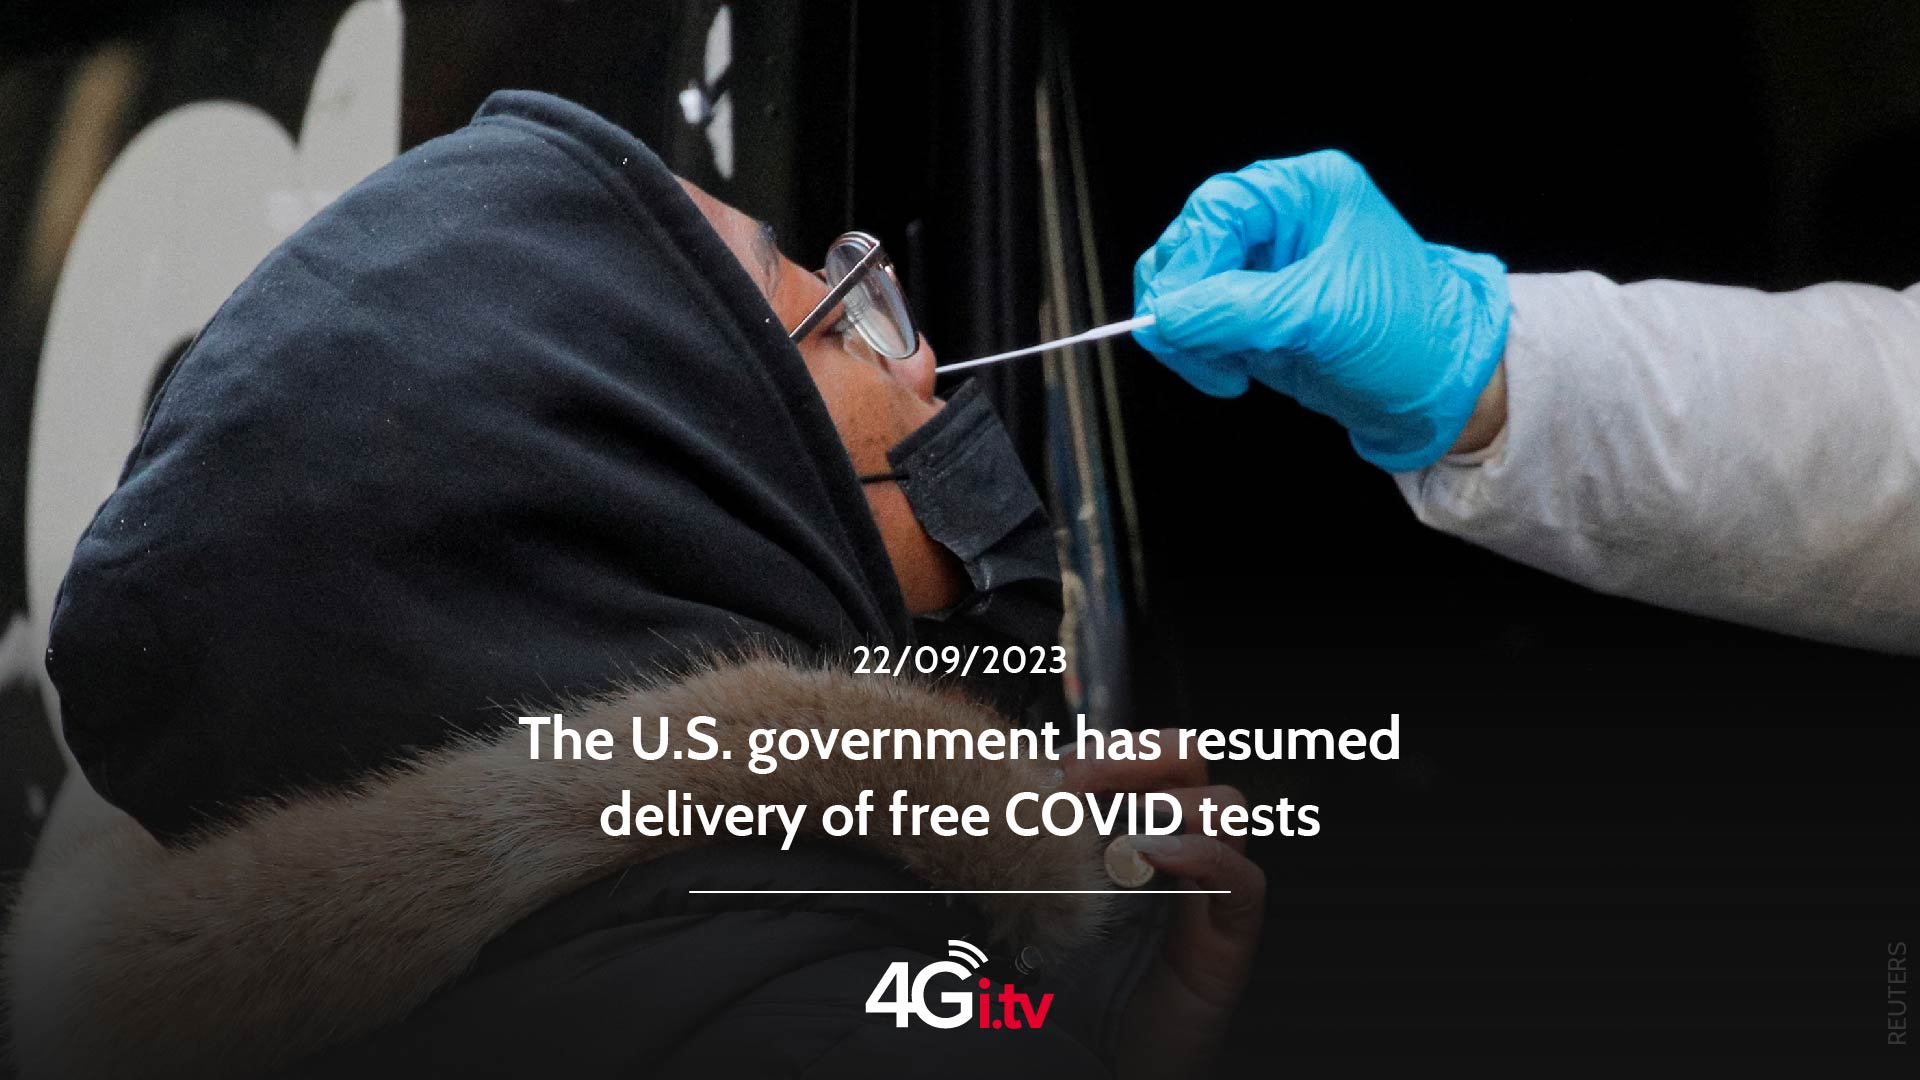 Lesen Sie mehr über den Artikel The U.S. government has resumed delivery of free COVID tests